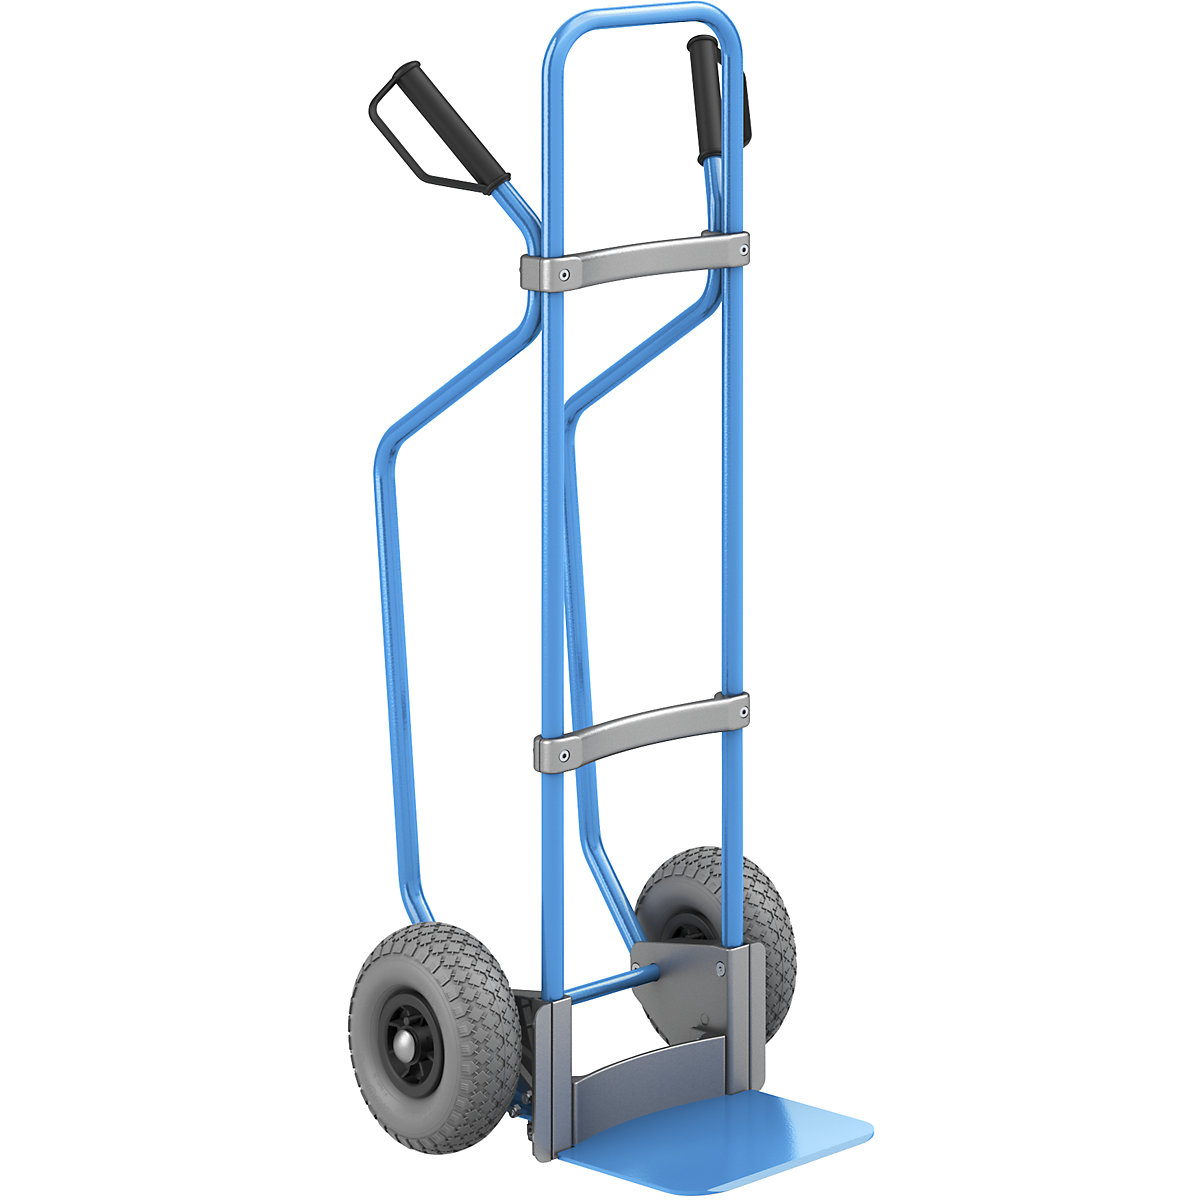 Sack truck with runners, blue – eurokraft pro, footplate WxD 280 x 250 mm, blue, PU tyres-1